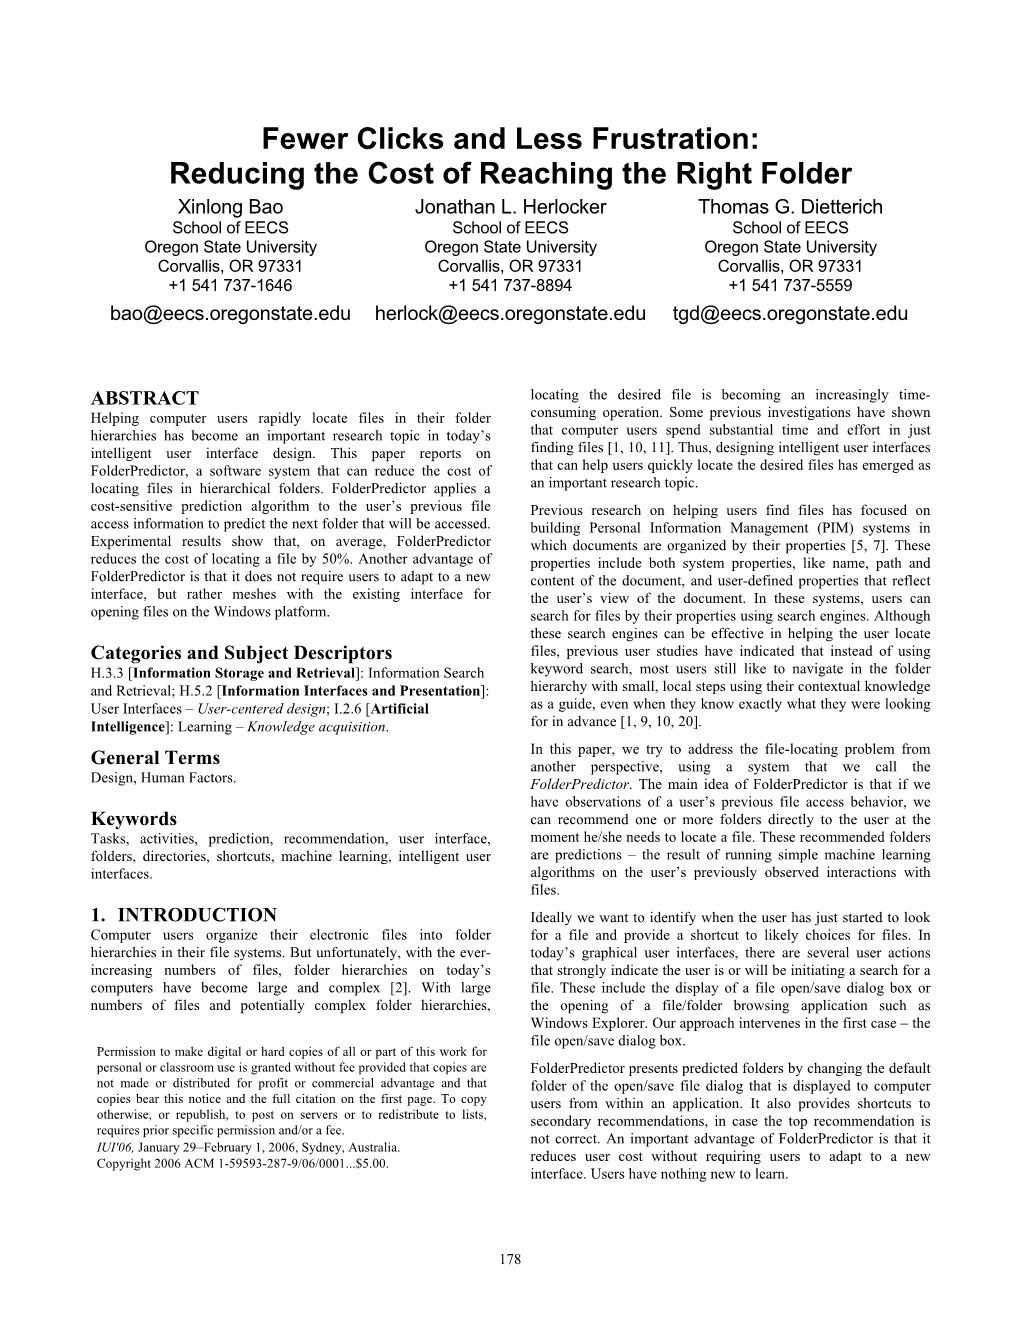 Fewer Clicks and Less Frustration: Reducing the Cost of Reaching the Right Folder Xinlong Bao Jonathan L